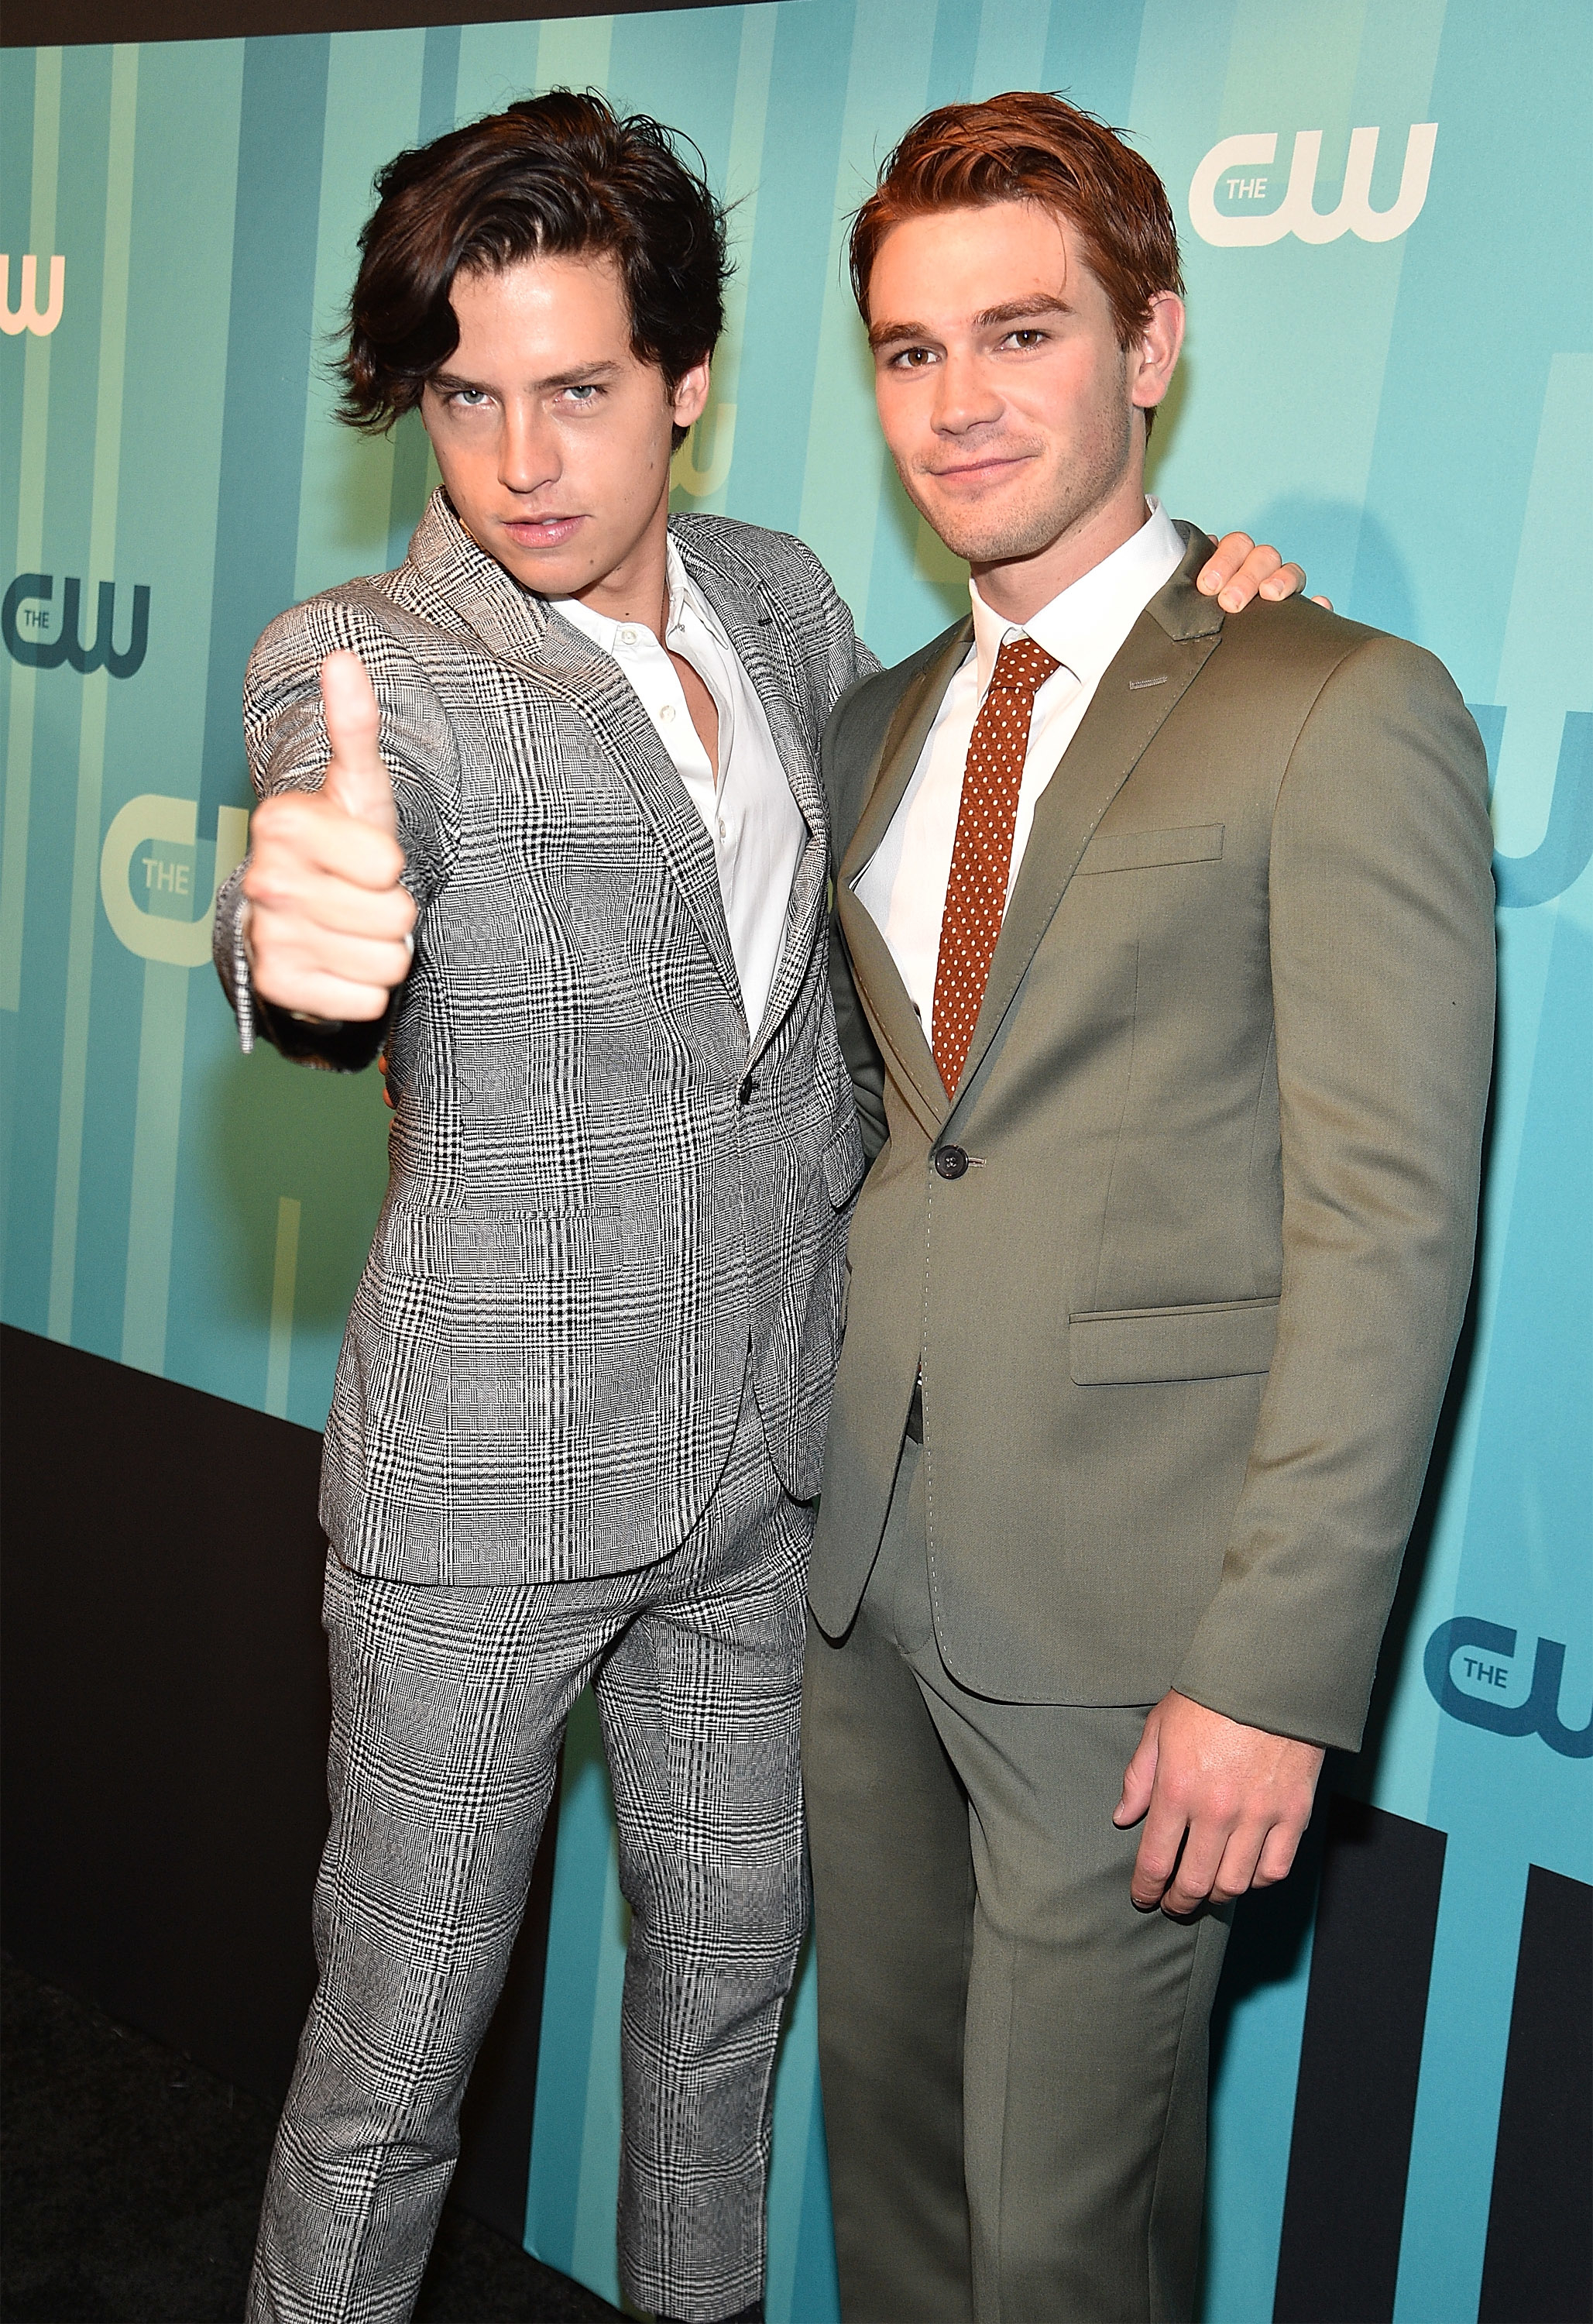 Cole Sprouse gives the thumbs up as he and KJ Apa get their picture taken at an event